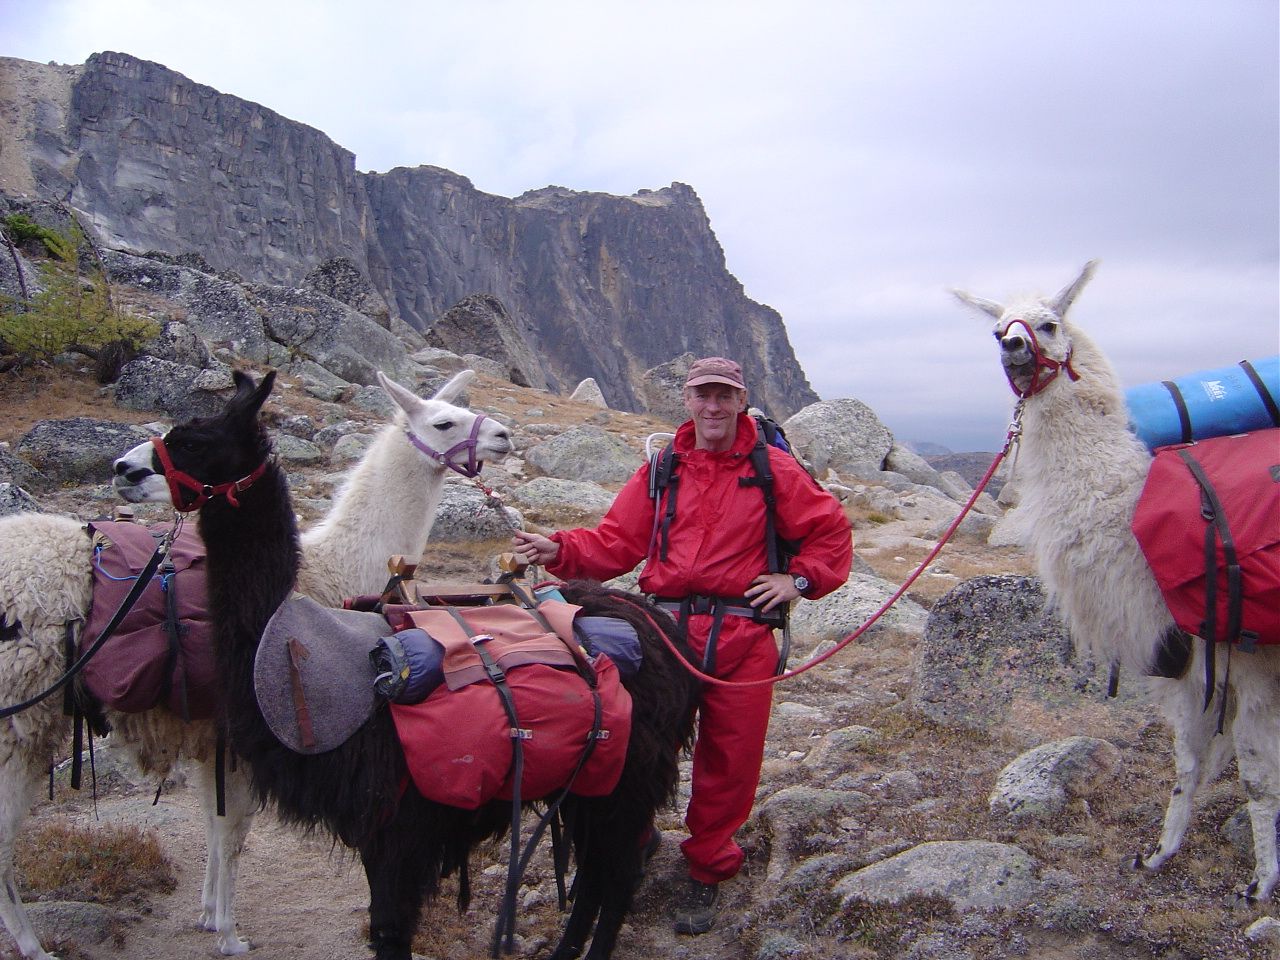 Randall in the Pasayten wilderness with llama friends.